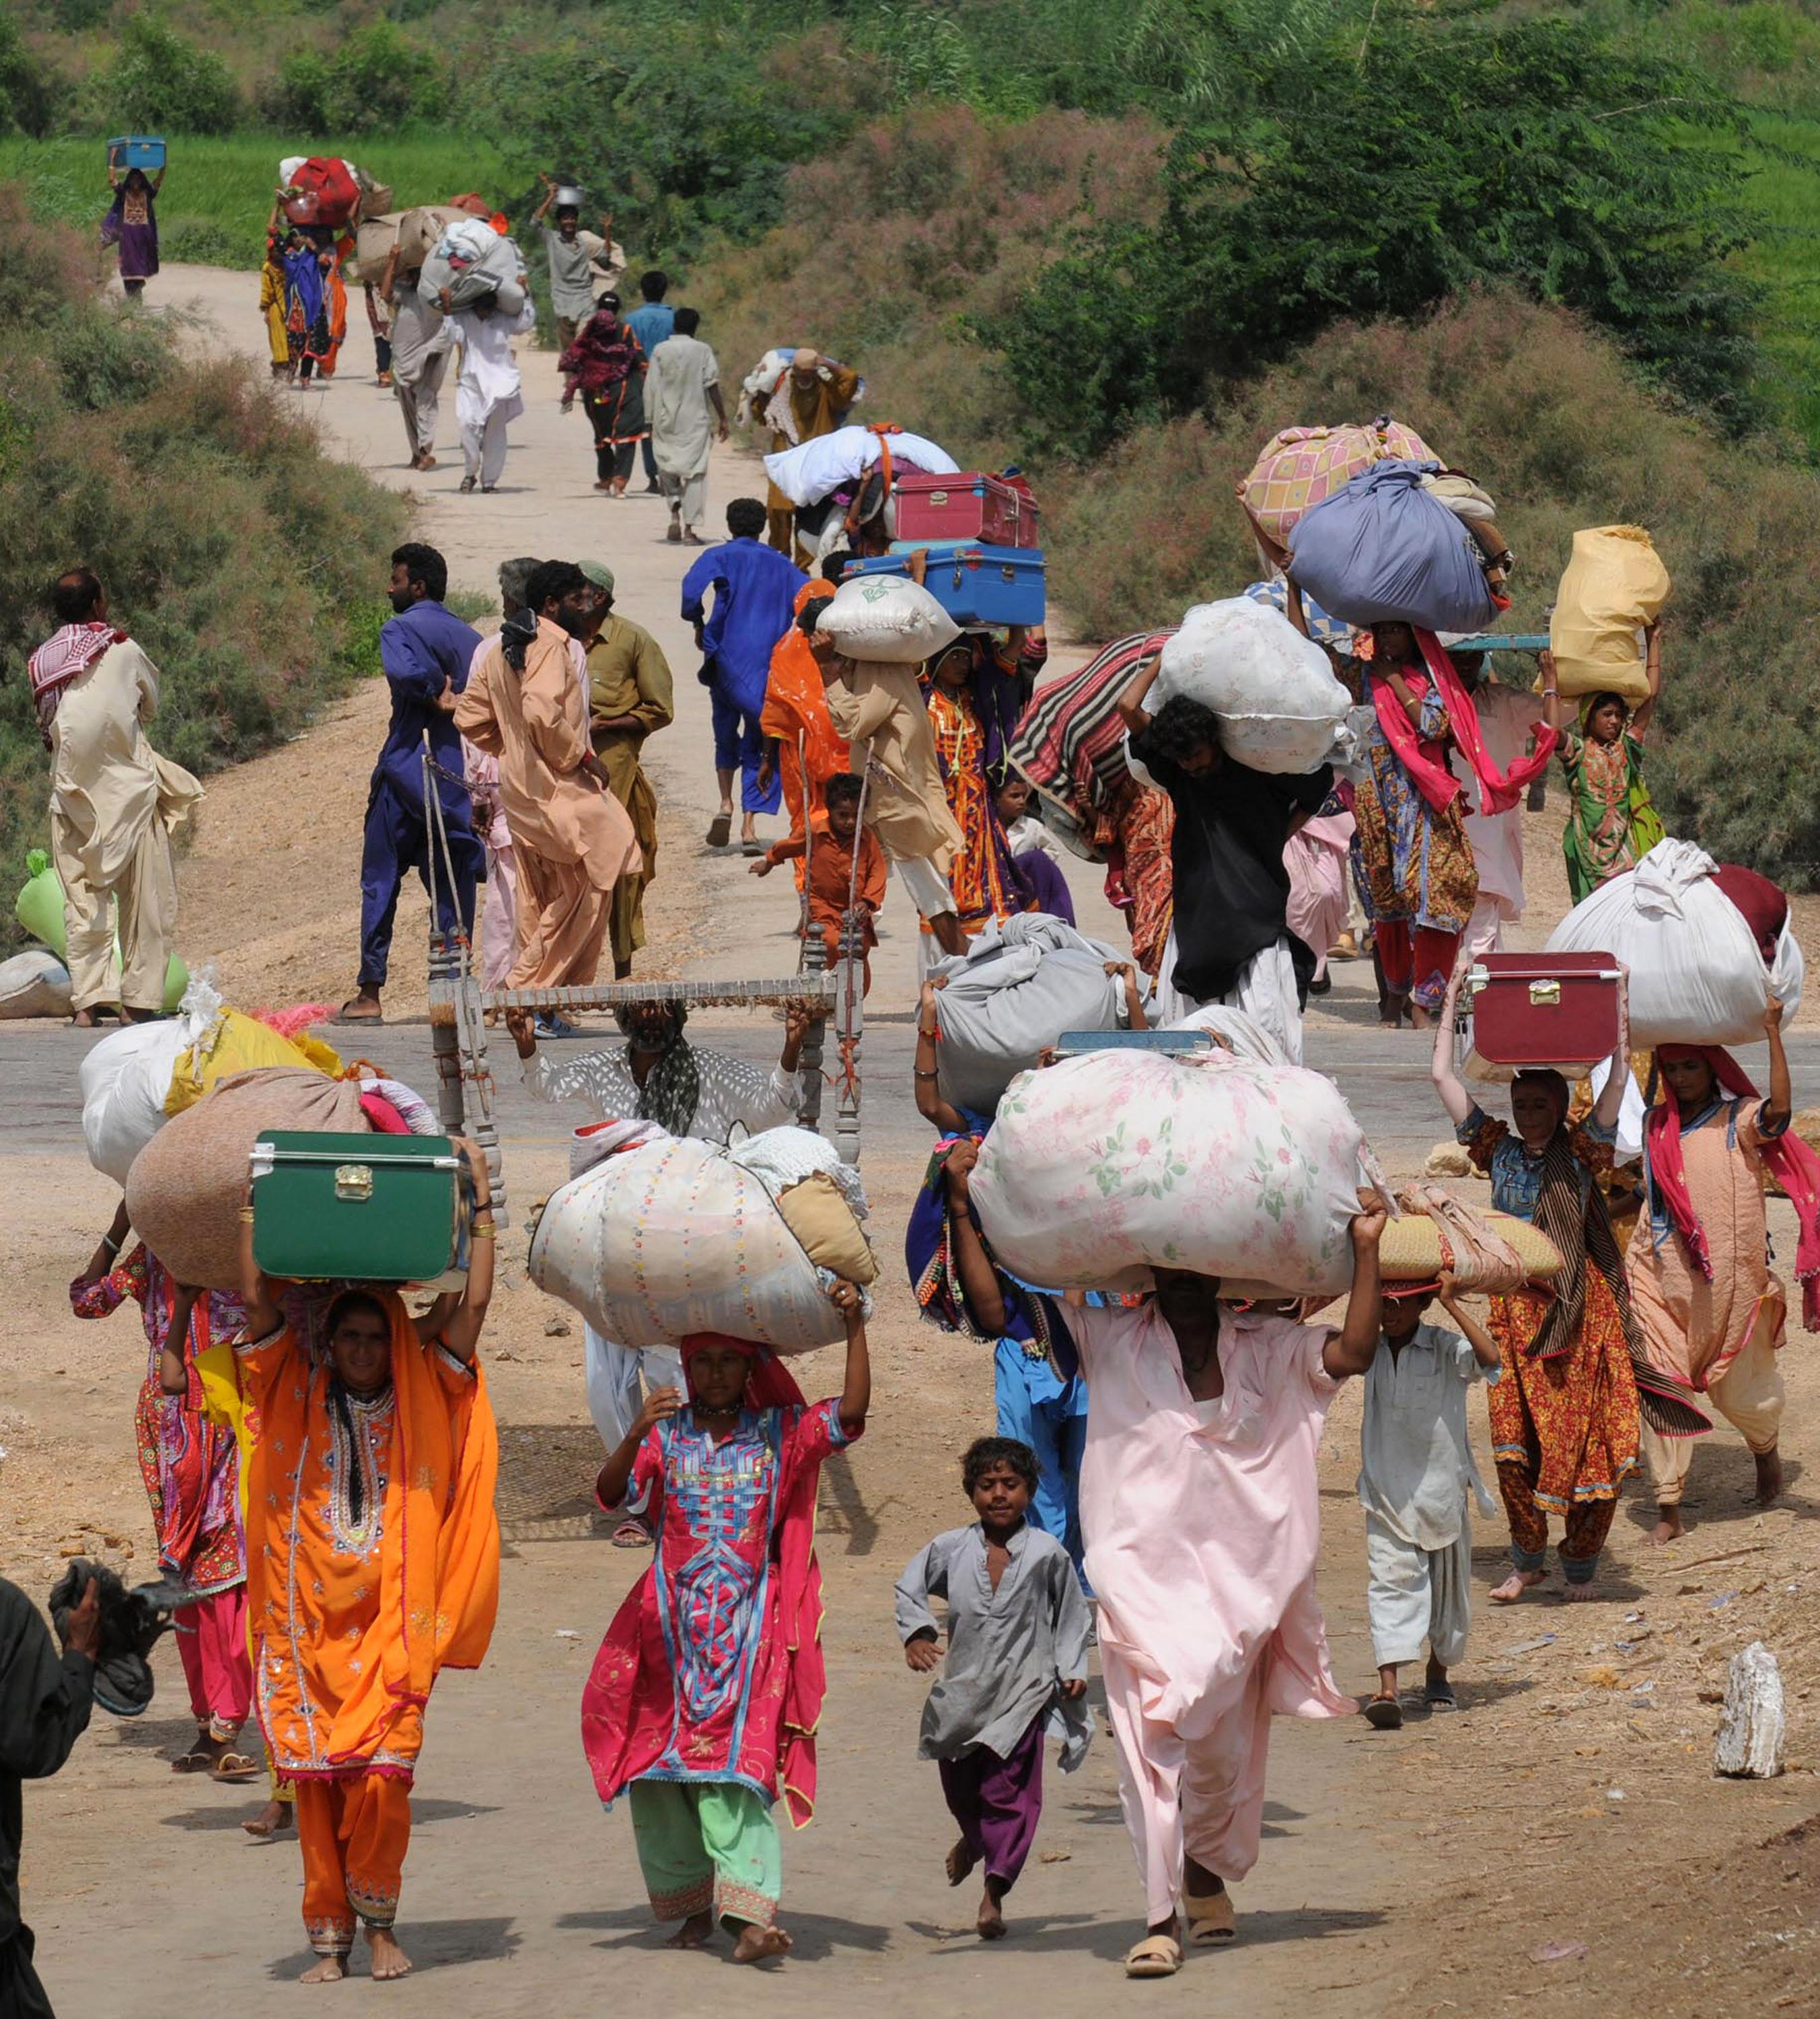 Women carrying parcels on their heads.